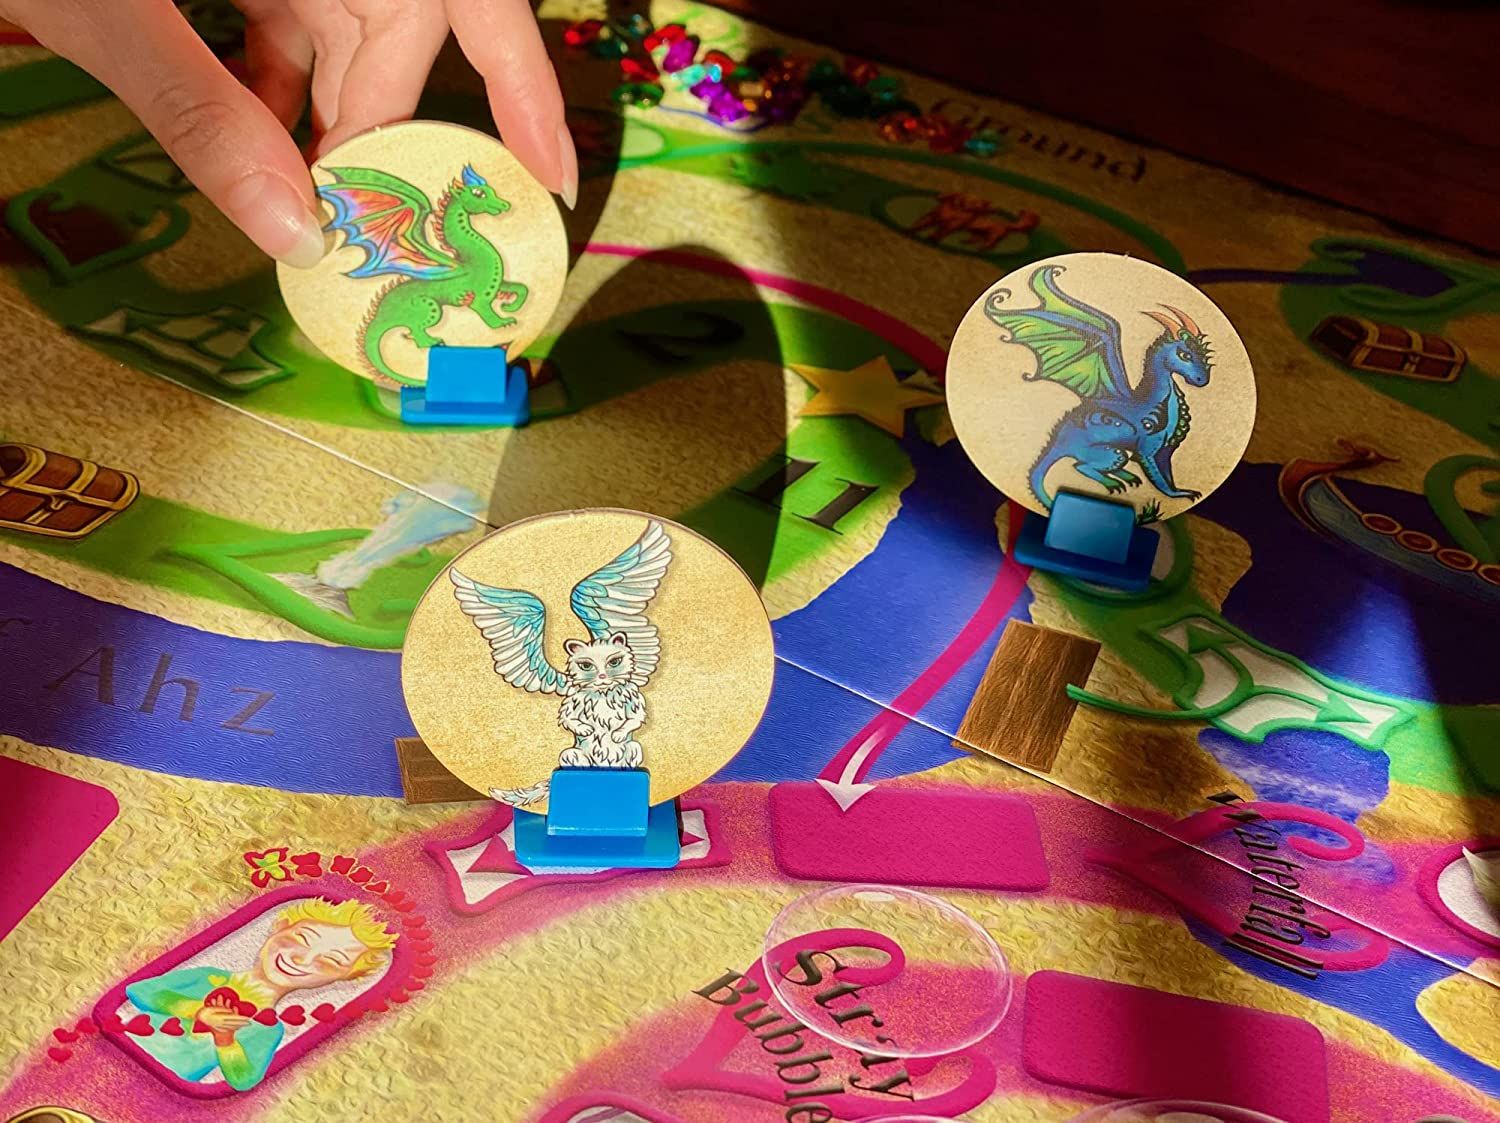 Dragon Wings is one of the most beautiful board games for kids